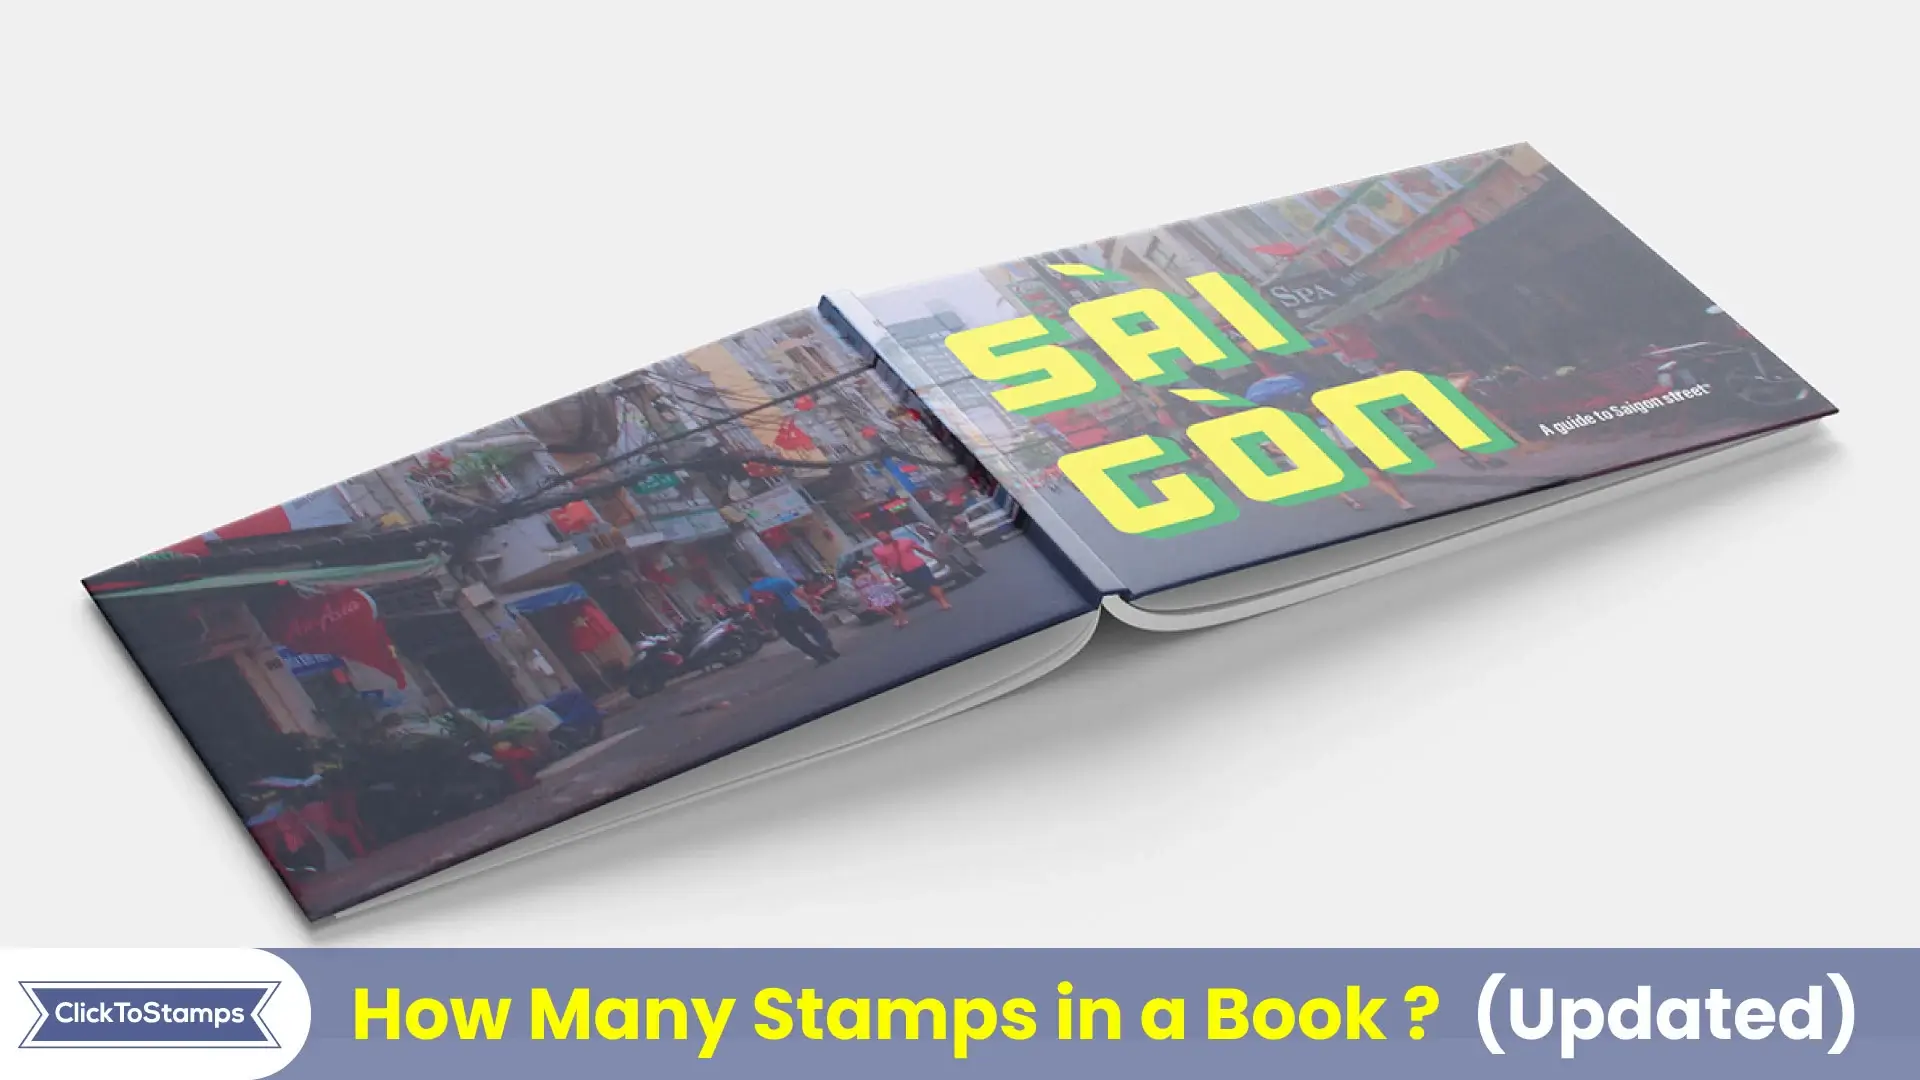 How Many Stamps in a Book